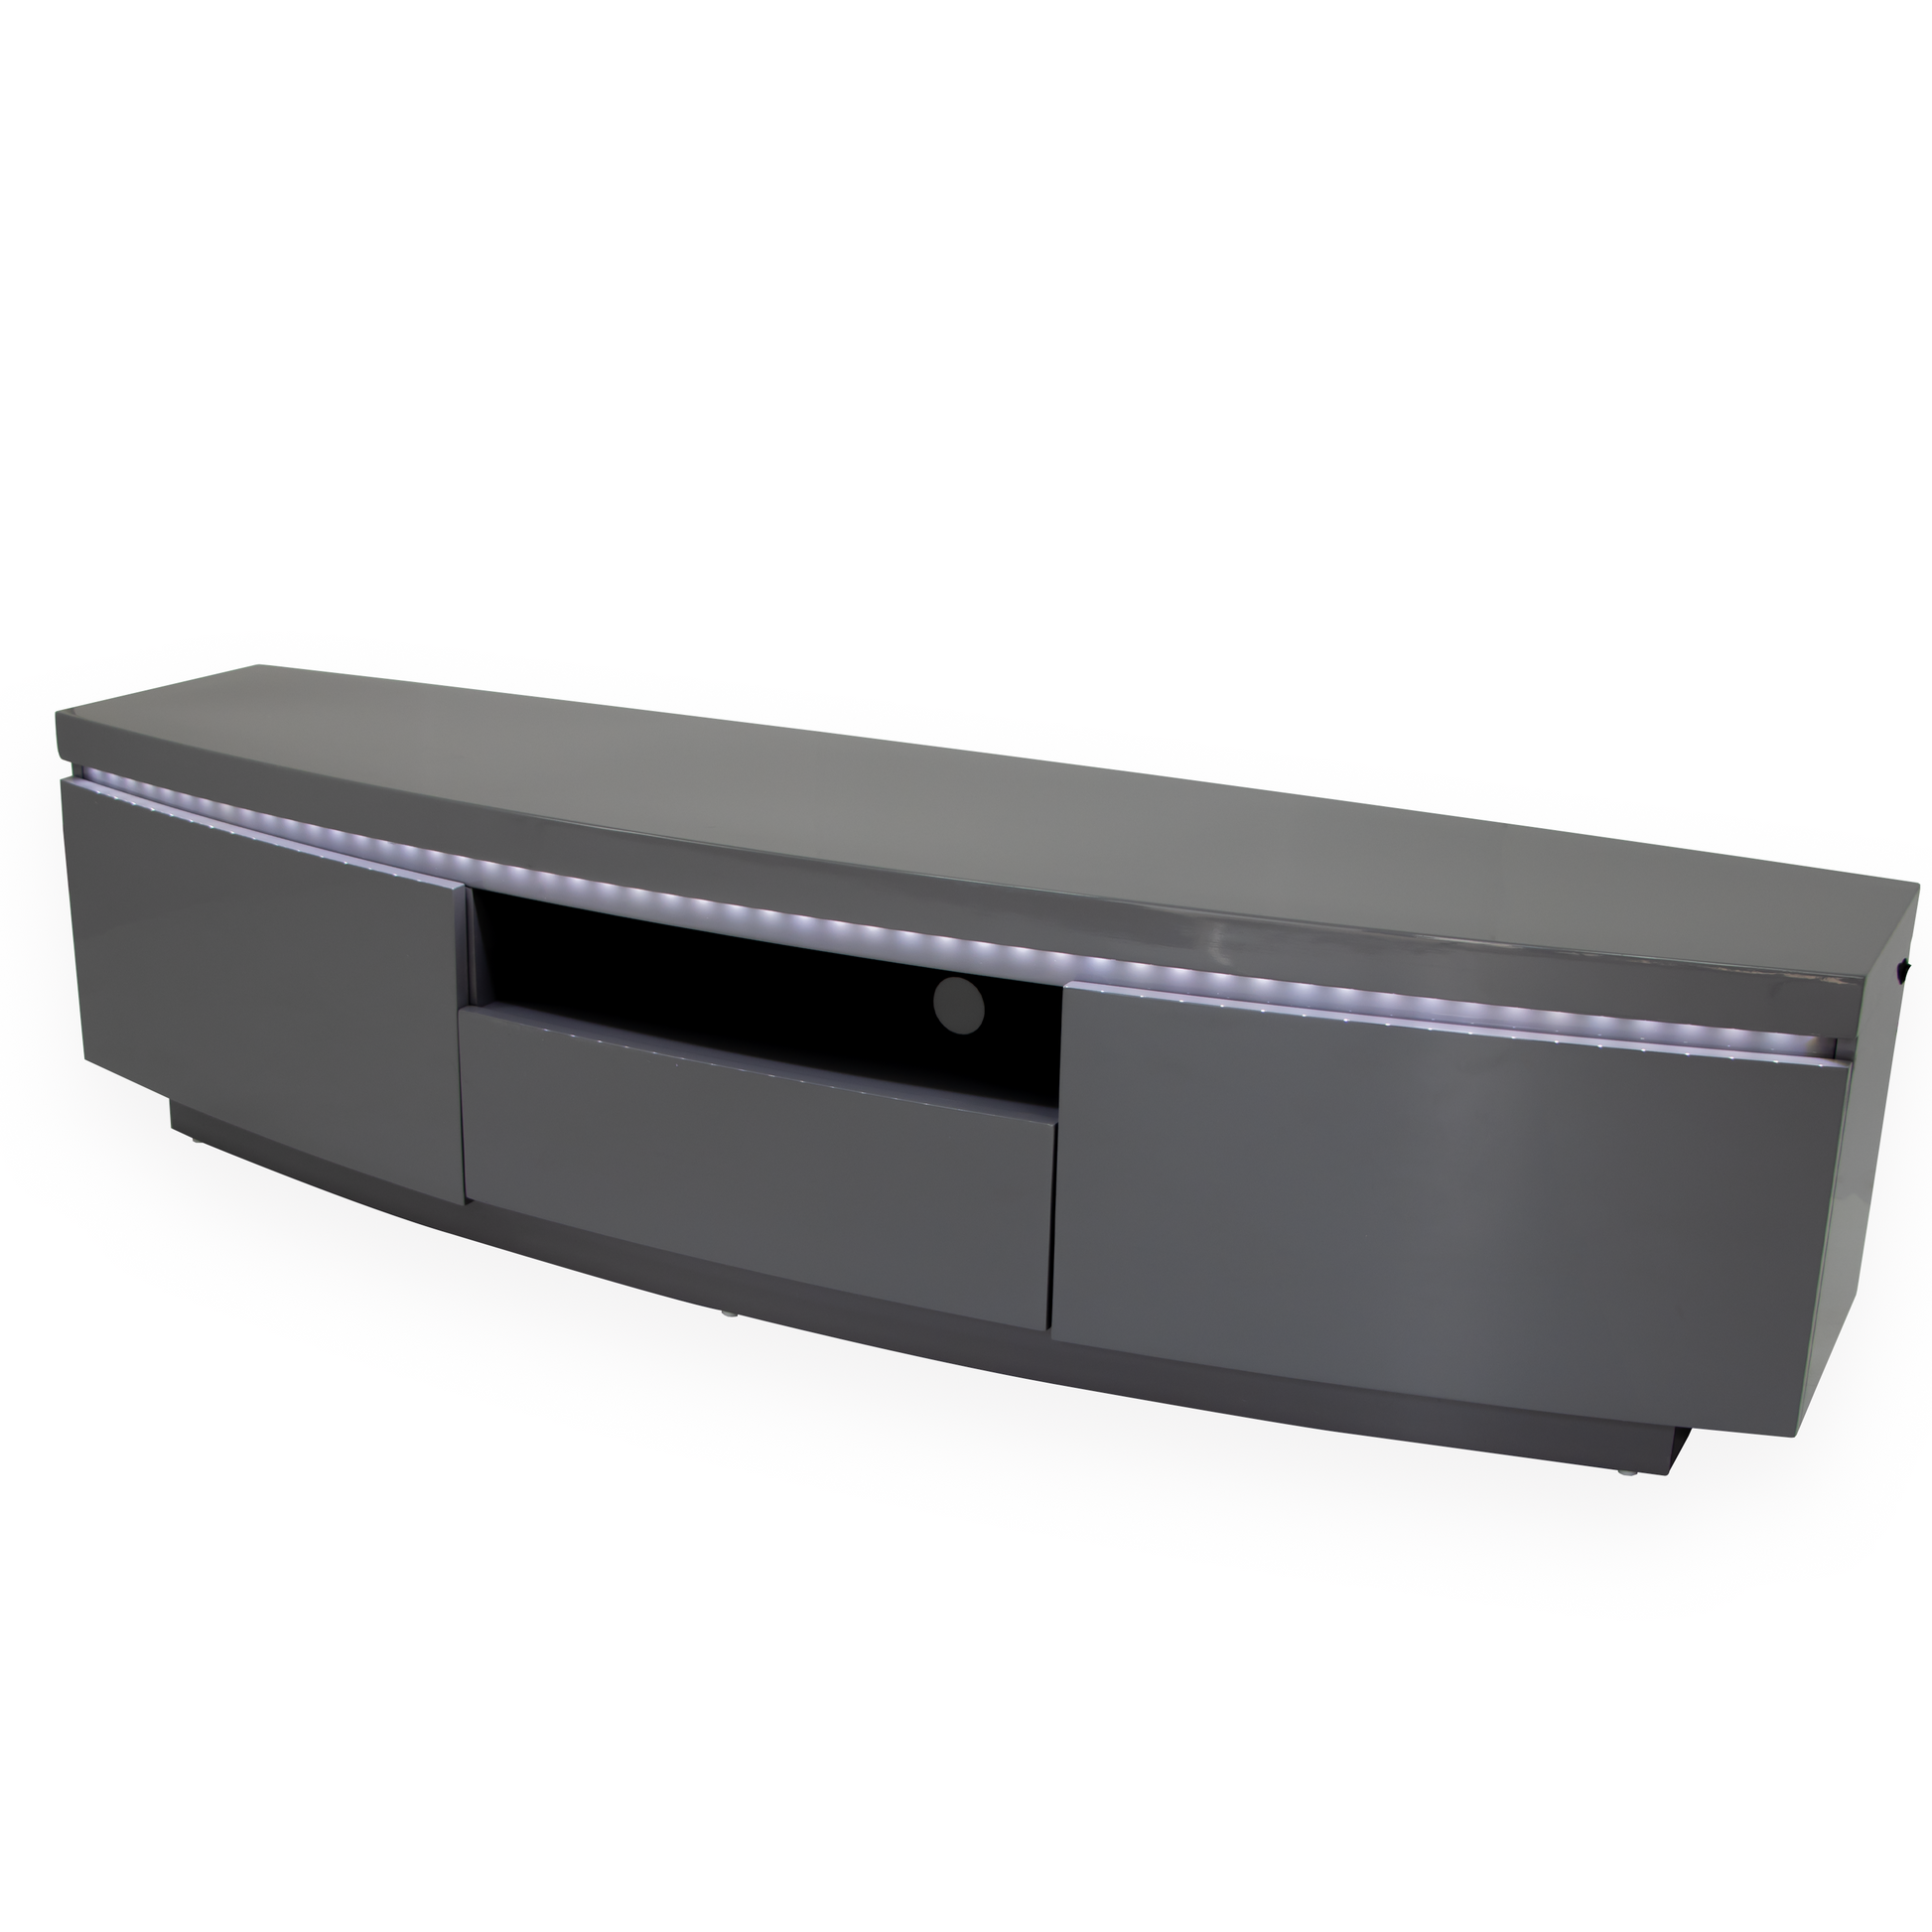 TV6158 - TV Stand